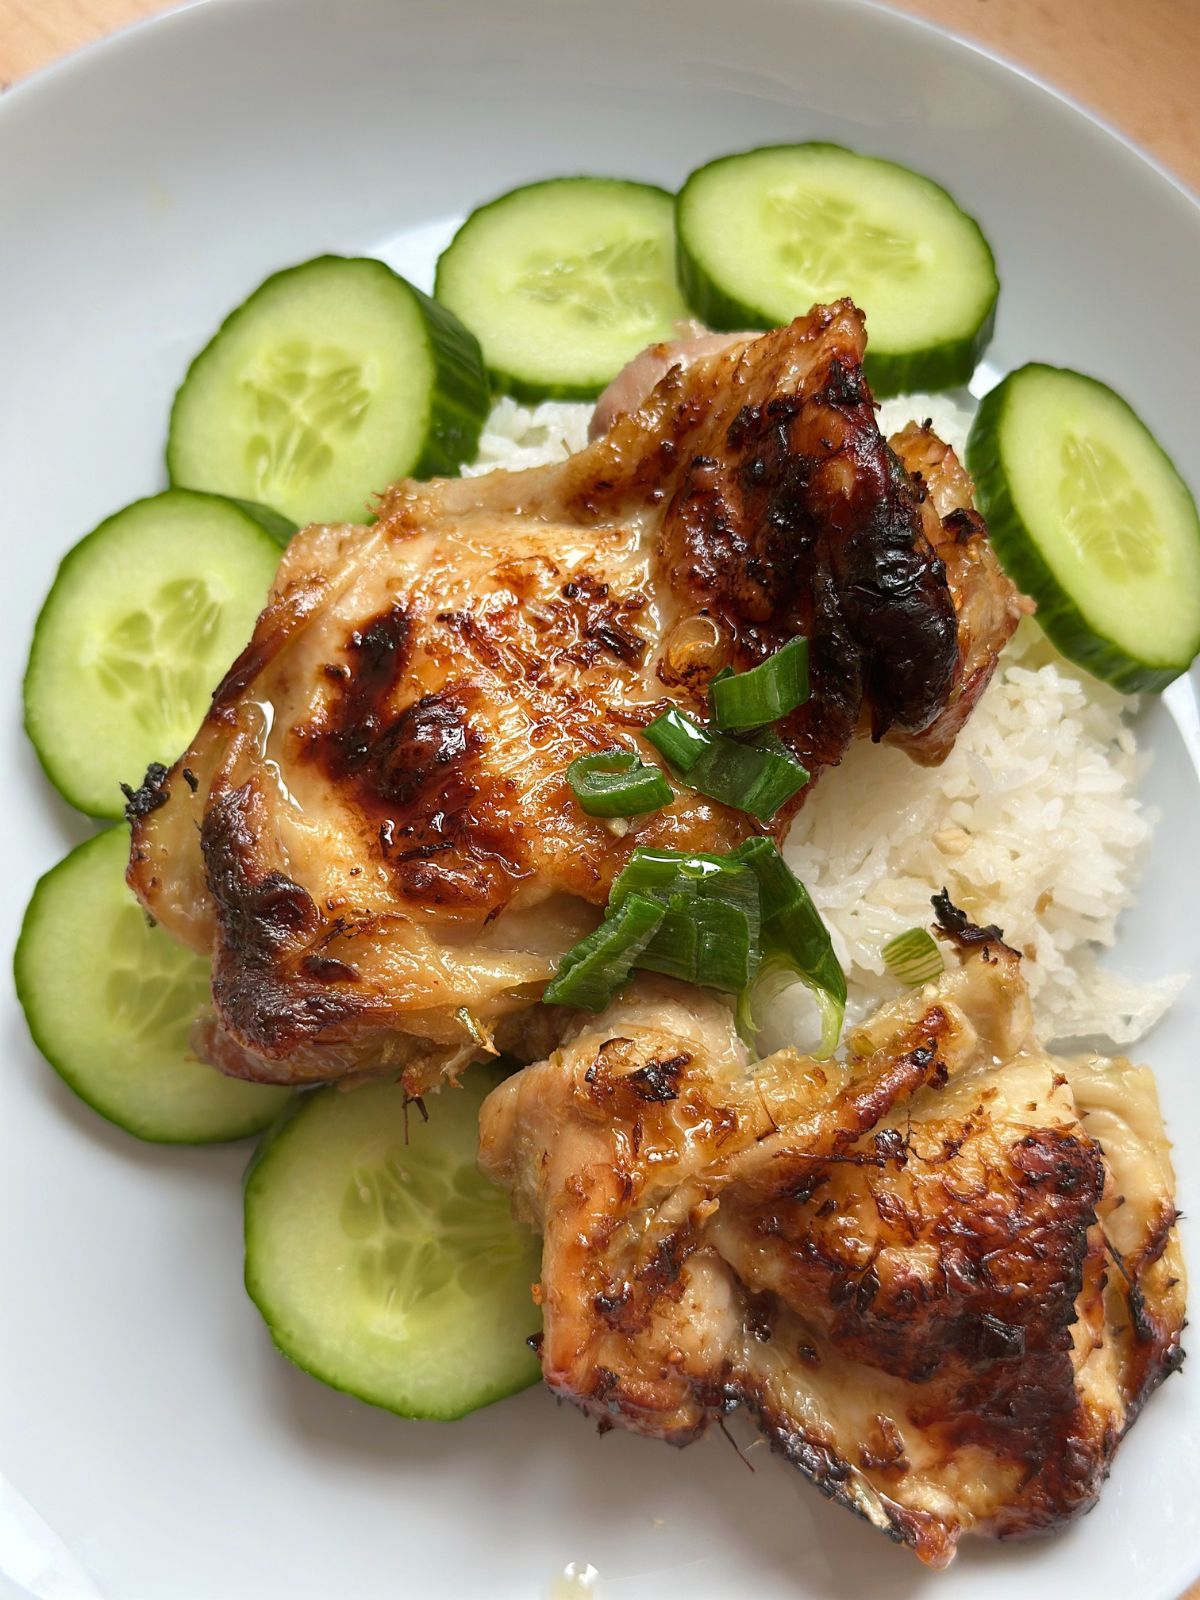 Lemongrass chicken with cucumbers and white rice on a white plate.